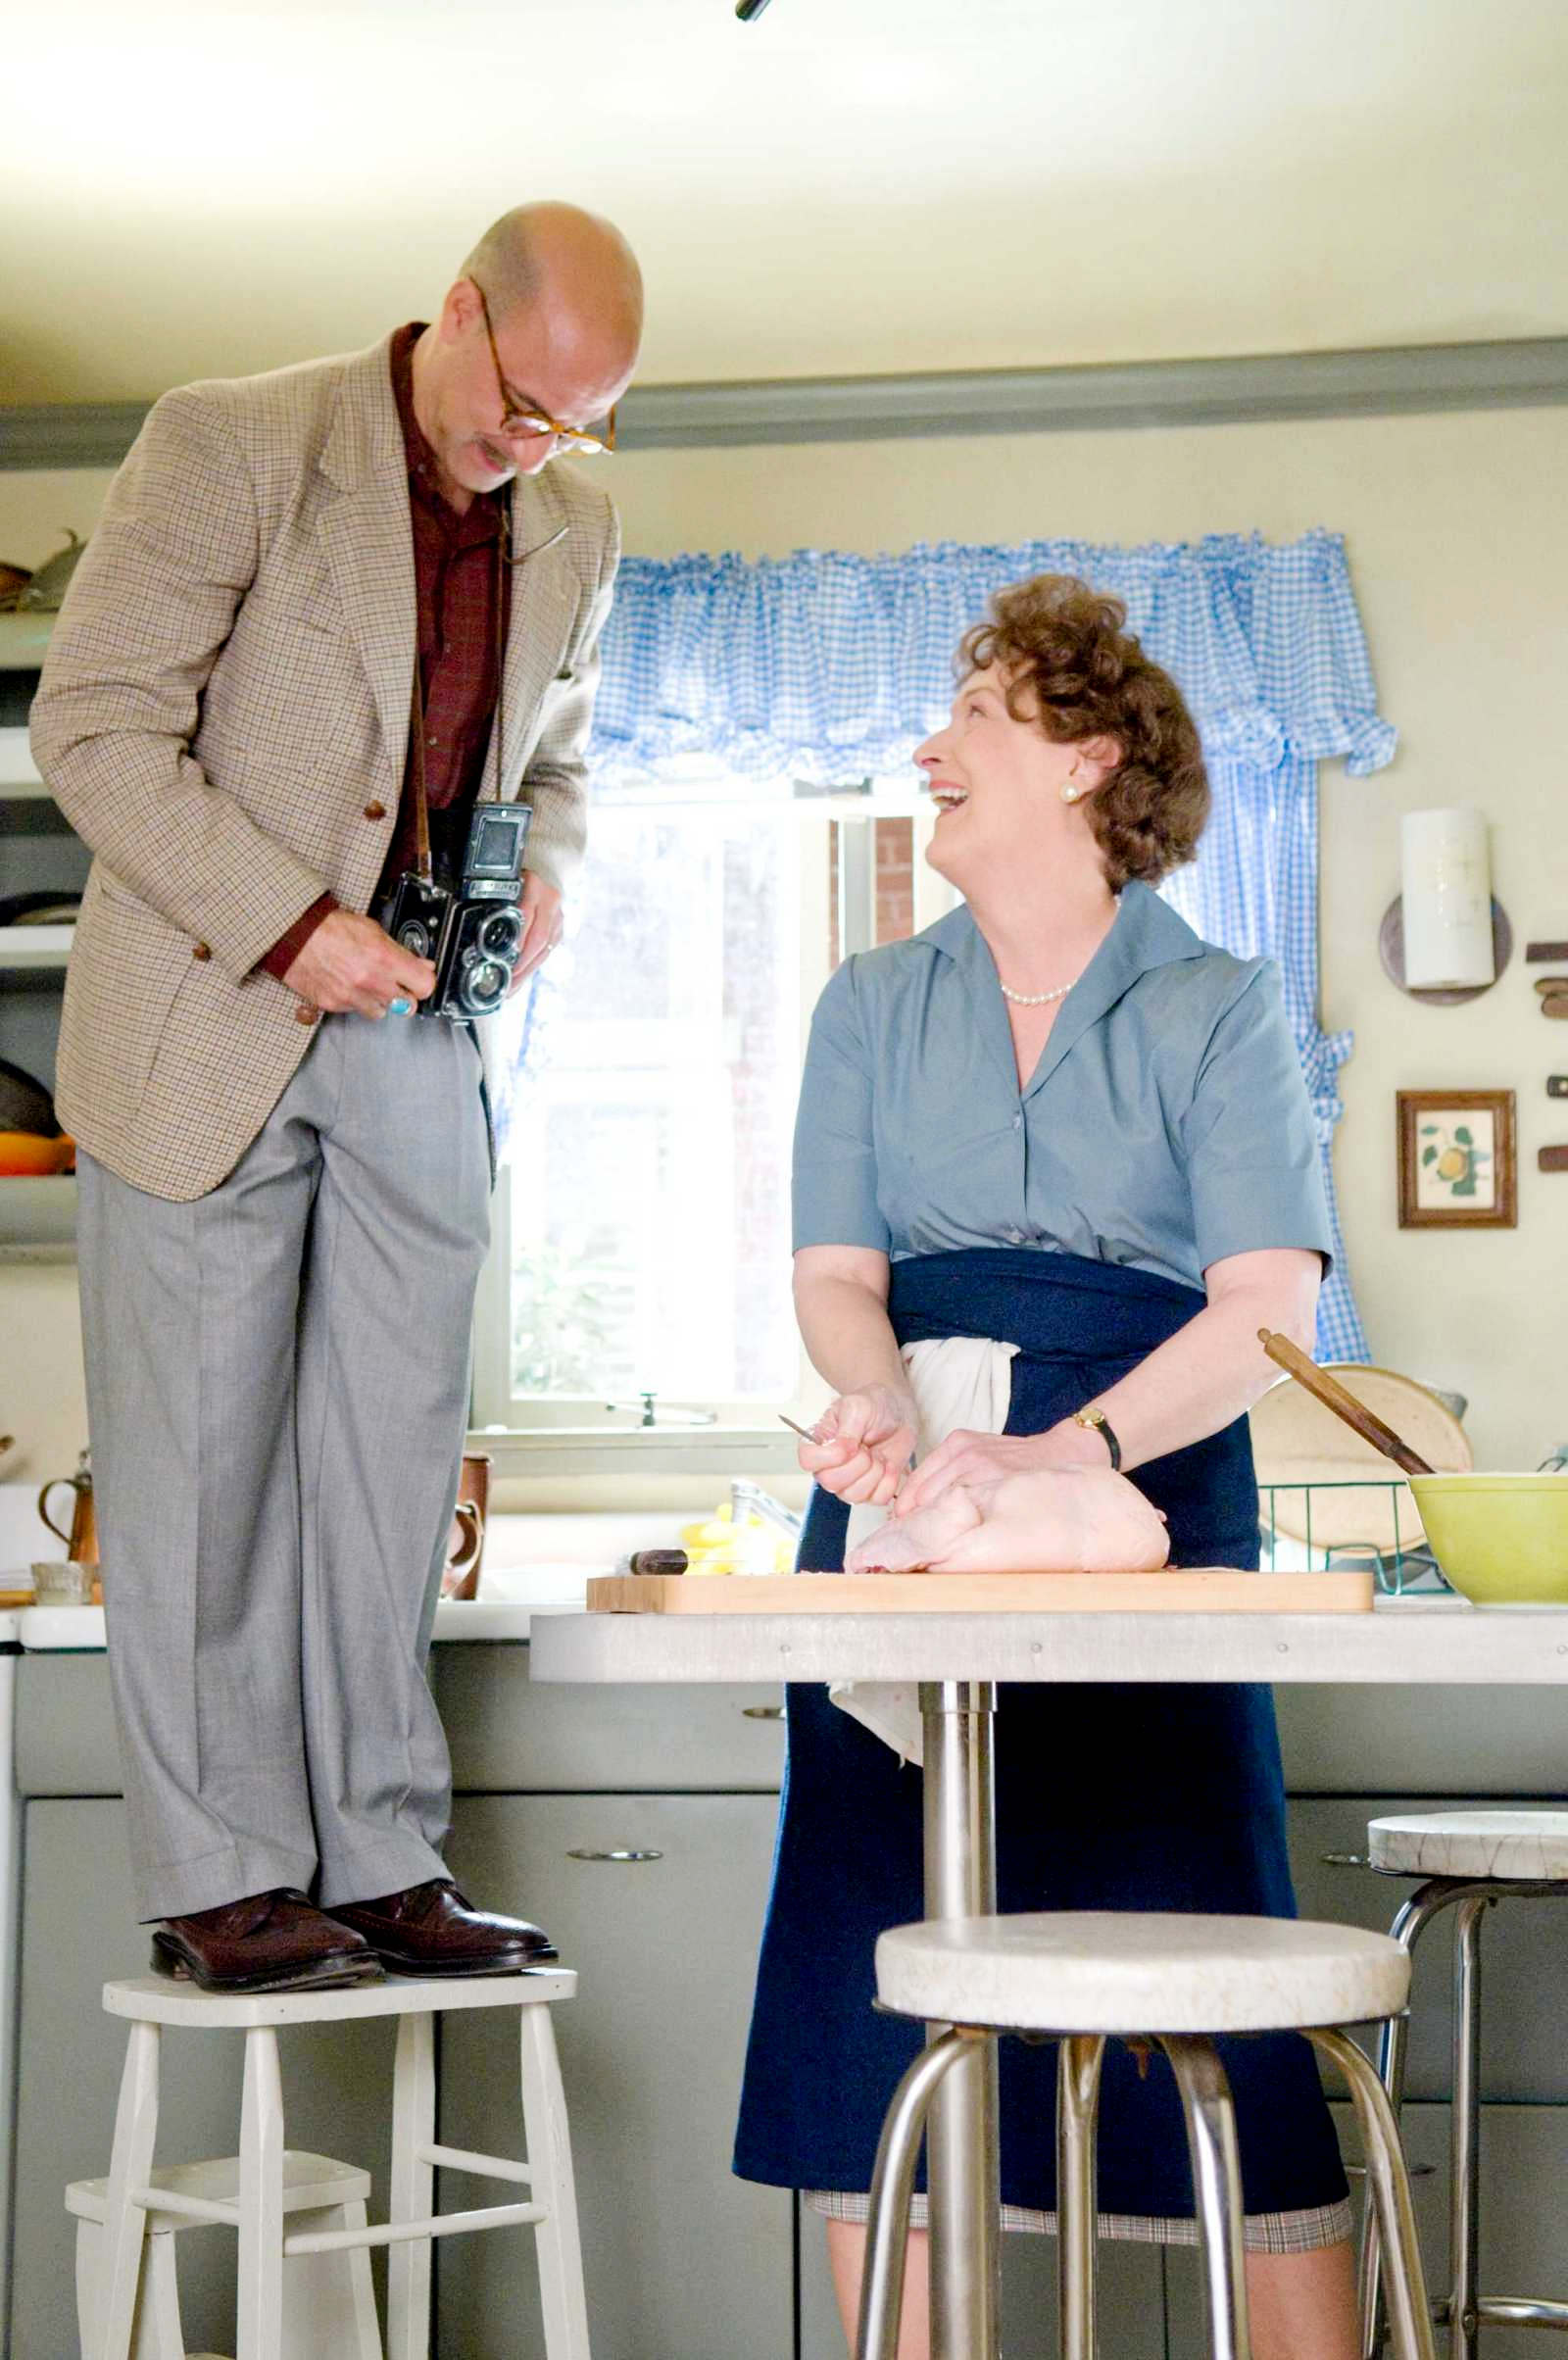 Stanley Tucci stars as Paul Child and Meryl Streep stars as Julia Child in Columbia Pictures' Julie & Julia (2009)